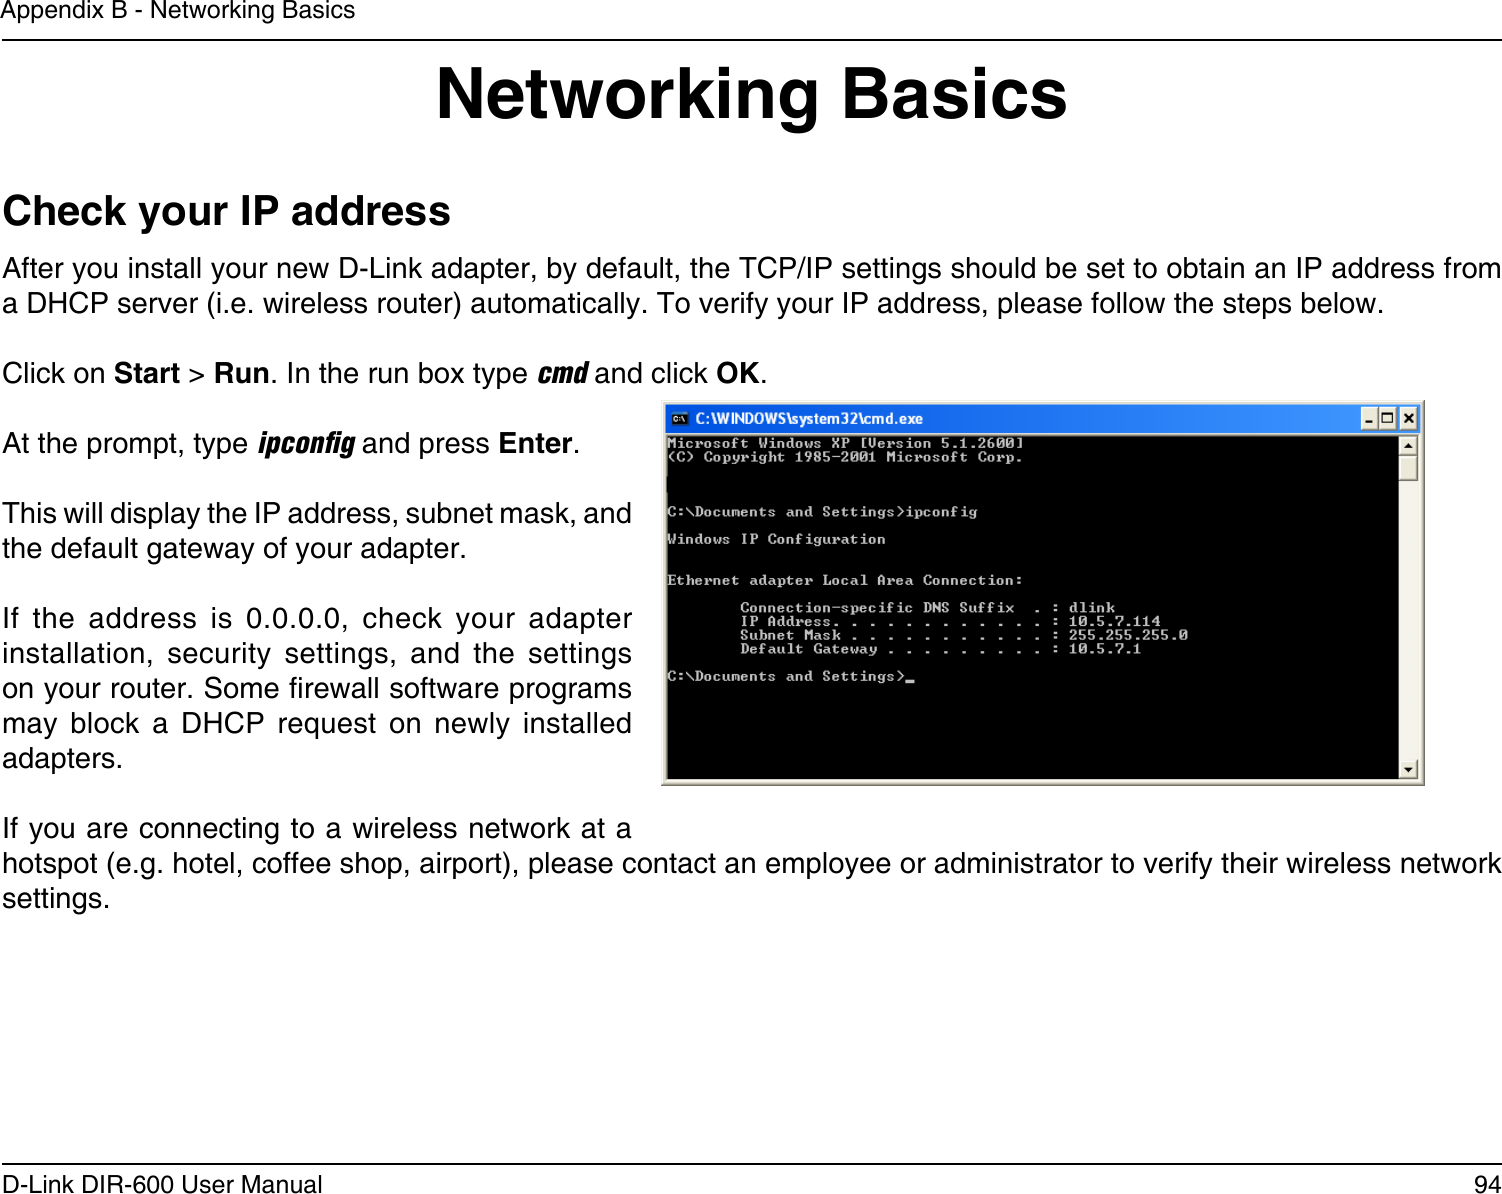 94D-Link DIR-600 User ManualAppendix B - Networking BasicsNetworking BasicsCheck your IP addressAfter you install your new D-Link adapter, by default, the TCP/IP settings should be set to obtain an IP address from a DHCP server (i.e. wireless router) automatically. To verify your IP address, please follow the steps below.Click on Start &gt; Run. In the run box type cmd and click OK.At the prompt, type ipconﬁg and press Enter.This will display the IP address, subnet mask, and the default gateway of your adapter.If  the  address  is  0.0.0.0,  check  your  adapter installation,  security  settings,  and  the  settings on your router. Some rewall software programs may  block  a  DHCP  request  on  newly  installed adapters. If you are connecting to a wireless network at a hotspot (e.g. hotel, coffee shop, airport), please contact an employee or administrator to verify their wireless network settings.